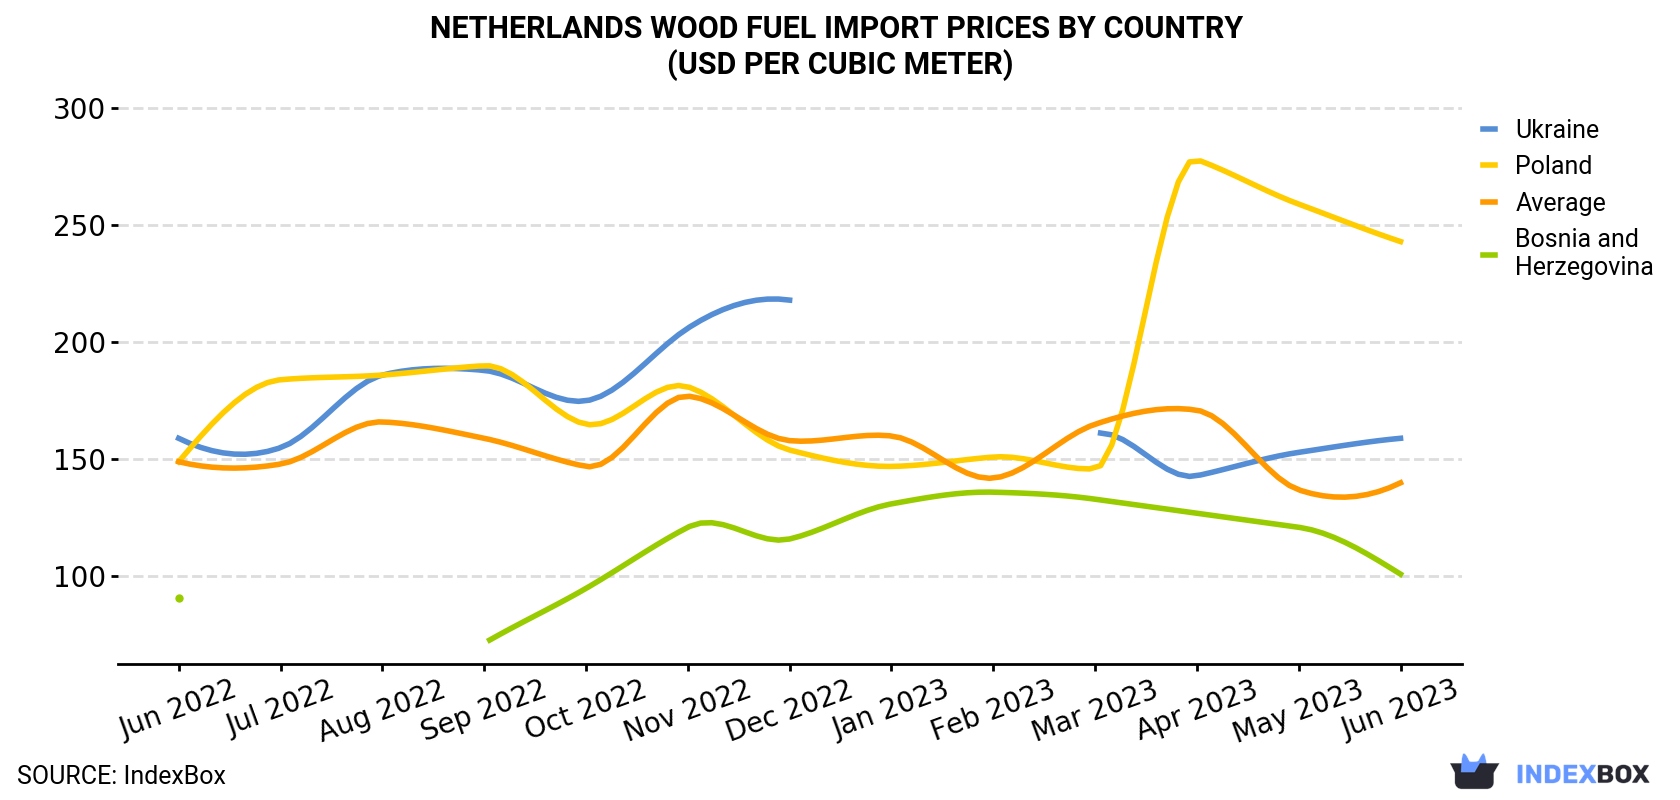 Netherlands Wood Fuel Import Prices By Country (USD Per Cubic Meter)